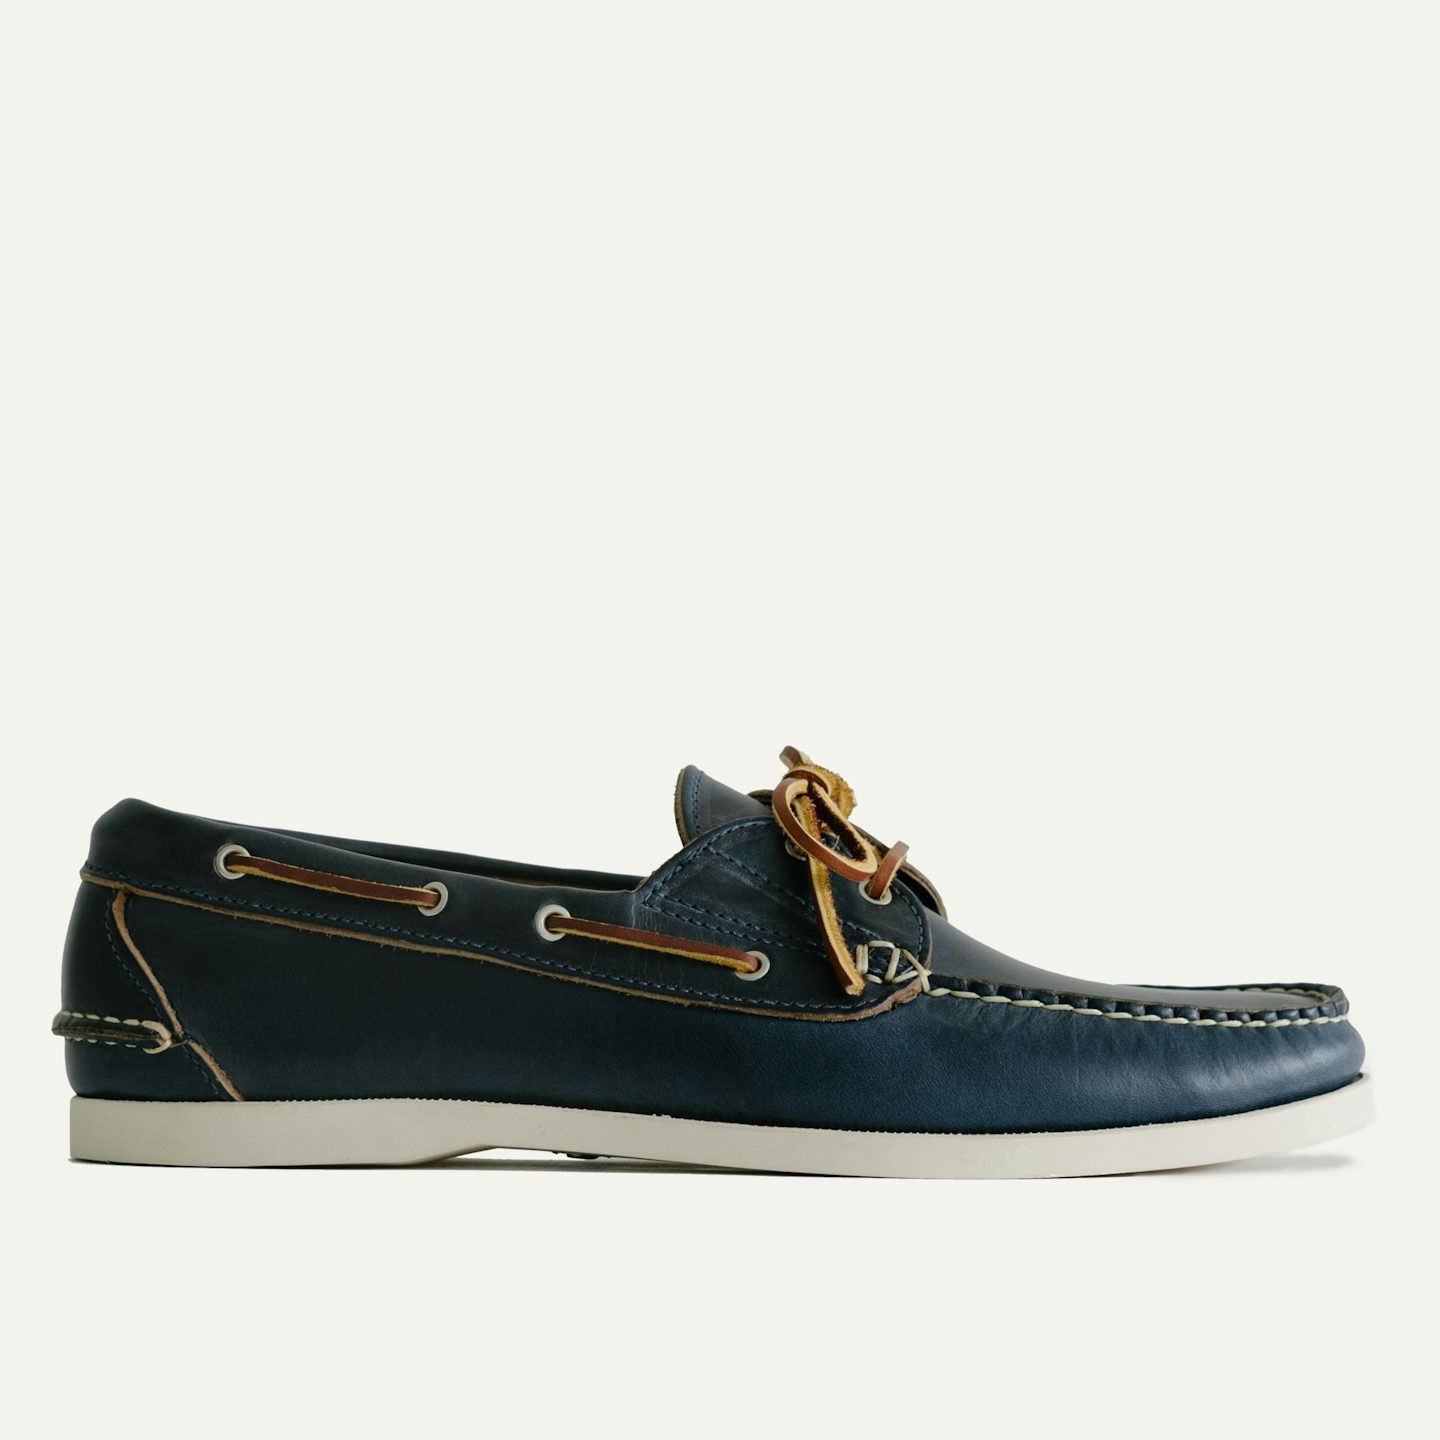 ægtemand At Menda City Boat Shoe - Navy Chromexcel, Deck Sole - Made in USA | Oak Street Bootmakers